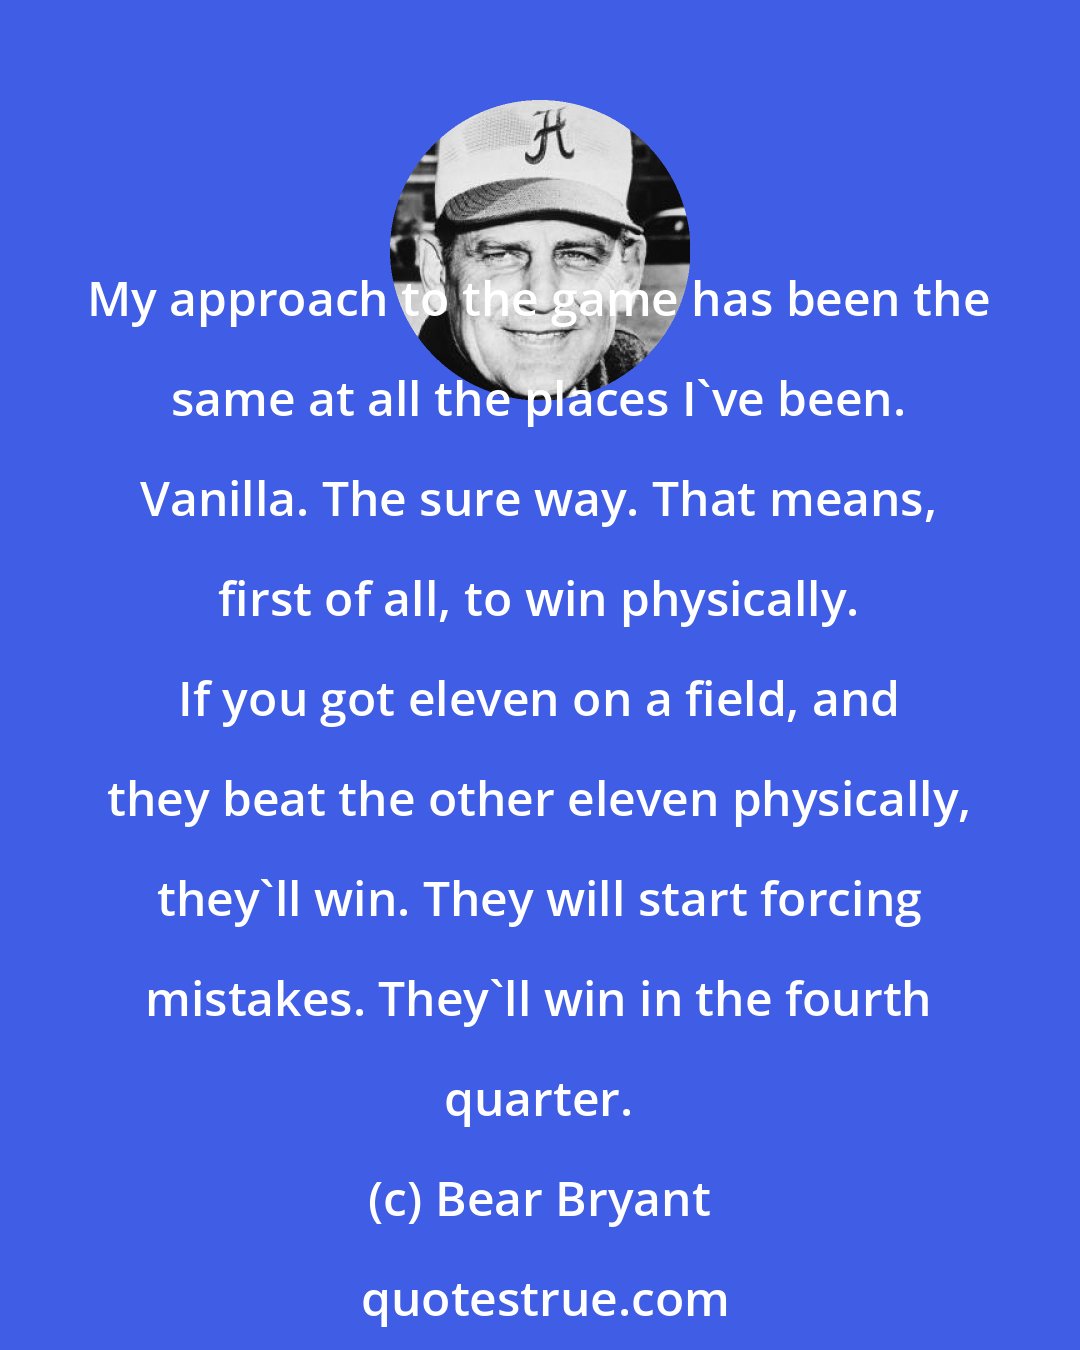 Bear Bryant: My approach to the game has been the same at all the places I've been. Vanilla. The sure way. That means, first of all, to win physically. If you got eleven on a field, and they beat the other eleven physically, they'll win. They will start forcing mistakes. They'll win in the fourth quarter.